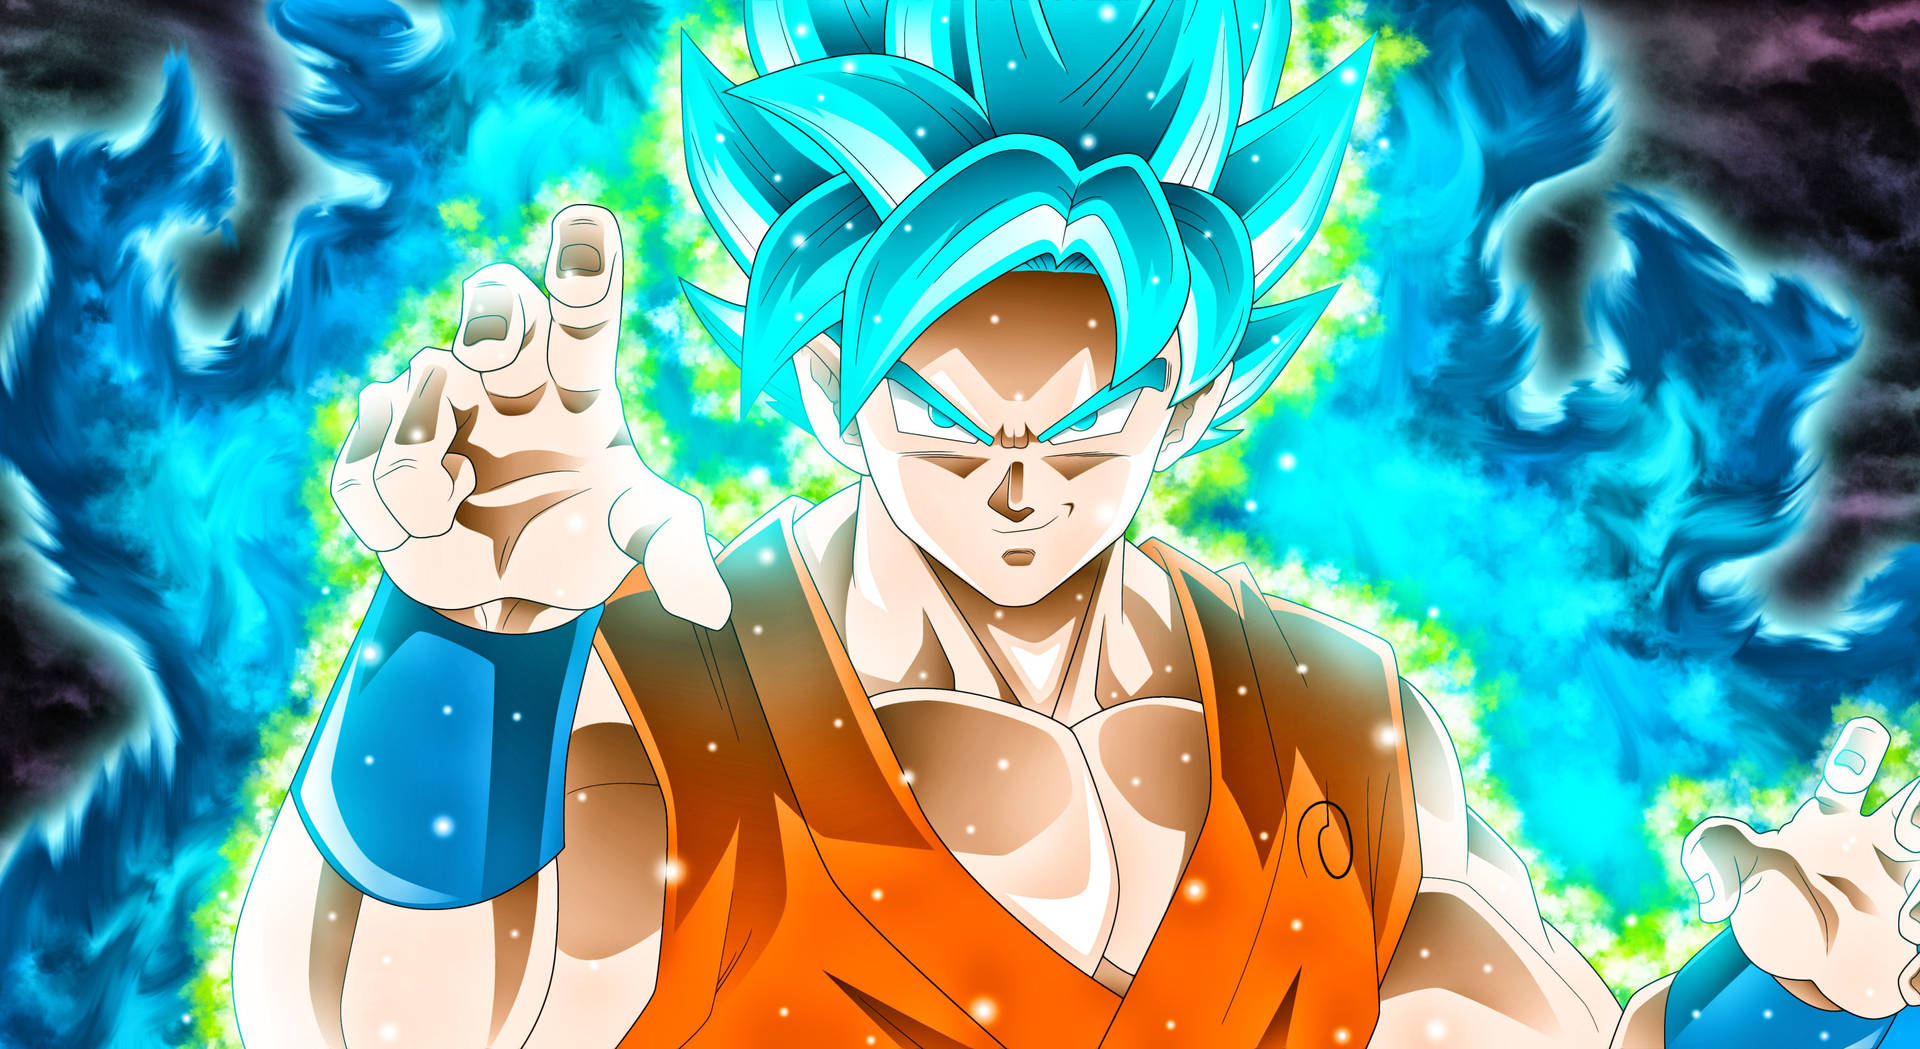 Flaring Son Goku is ready to fight Wallpaper